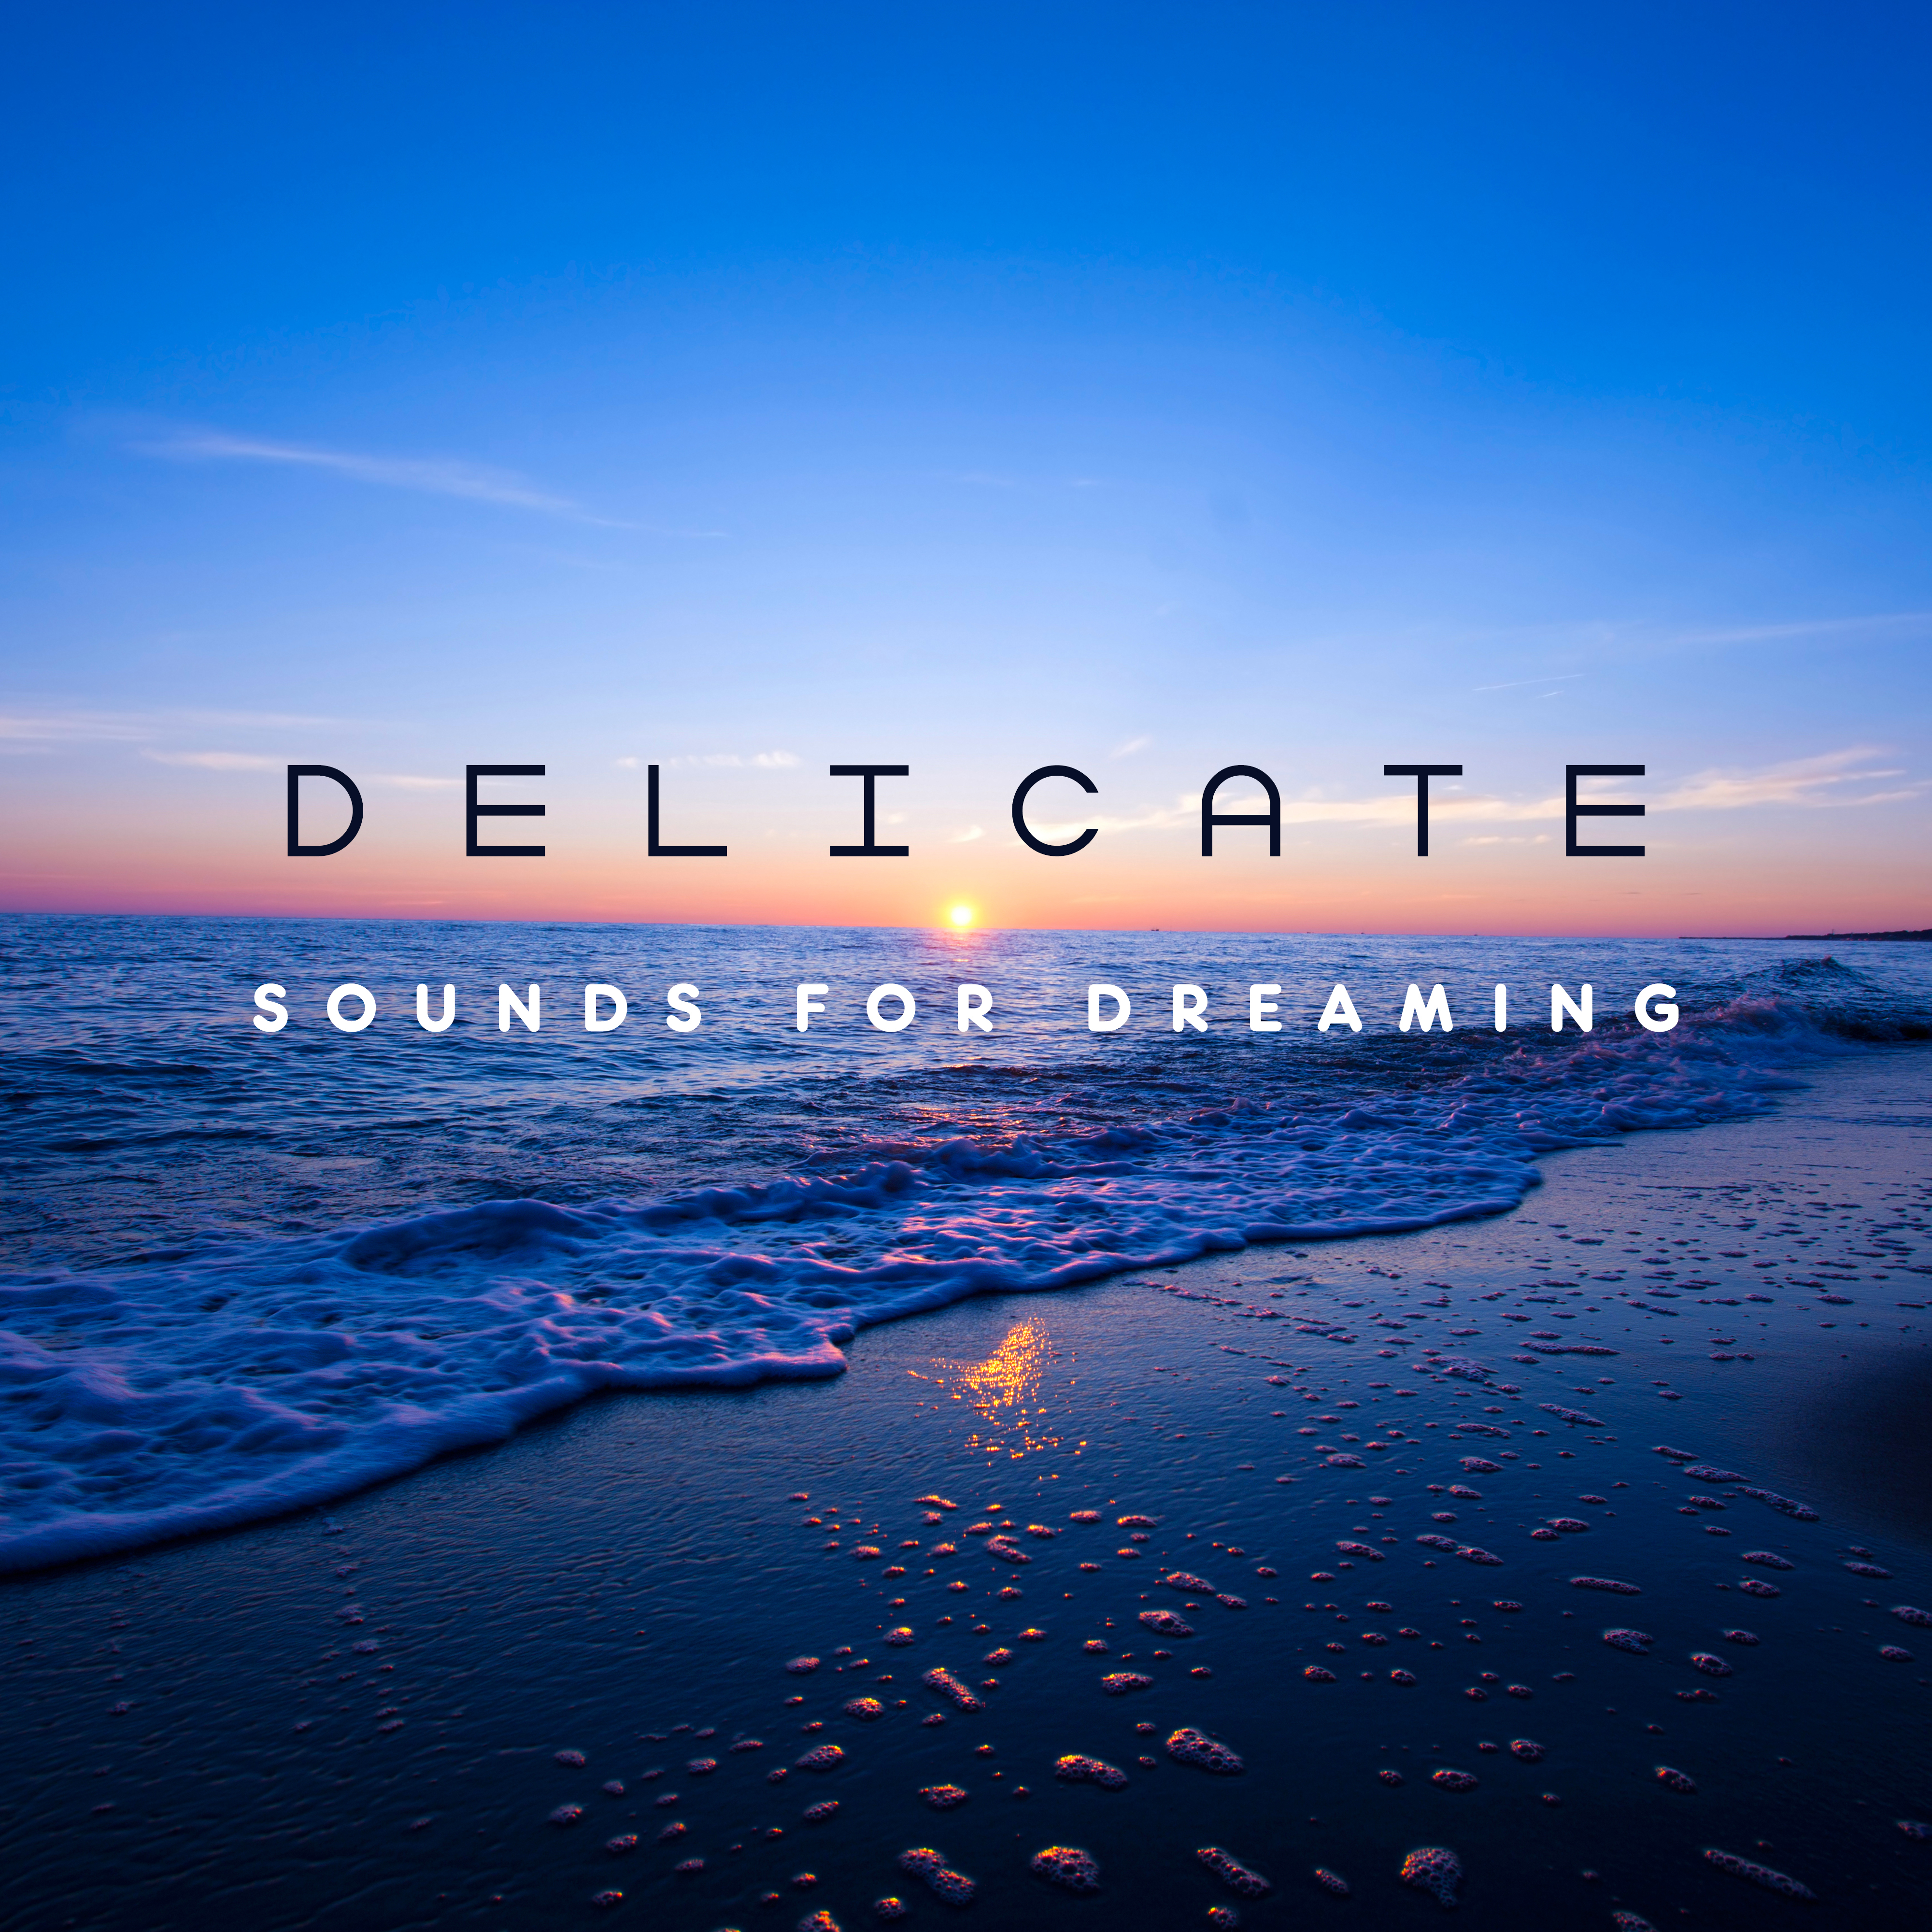 Delicate Sounds for Dreaming